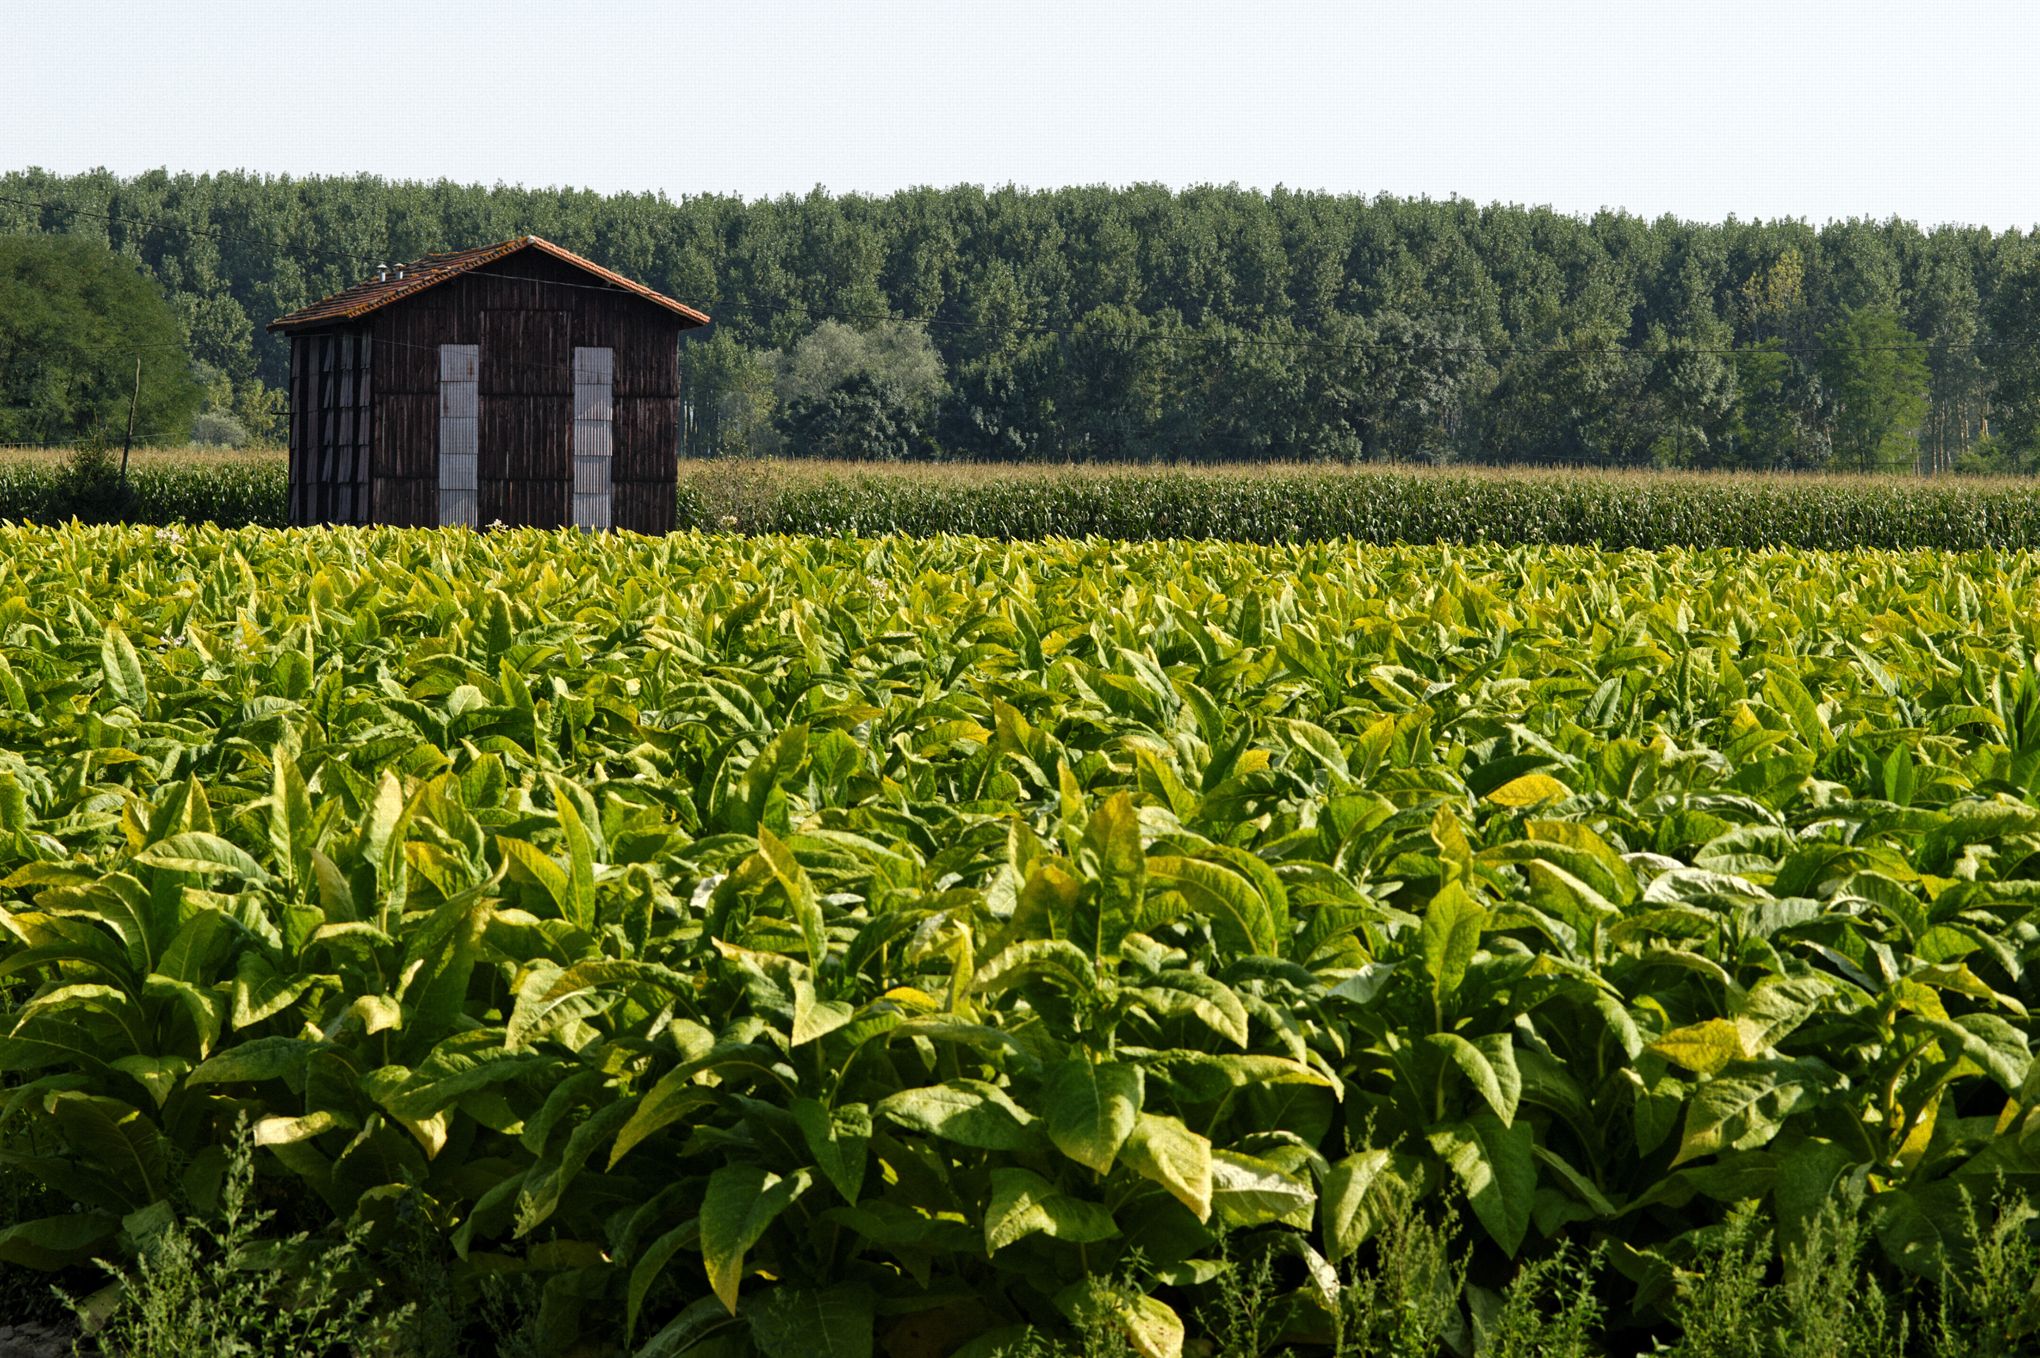 field of tobacco leaves in the foreground with a dryer in the background